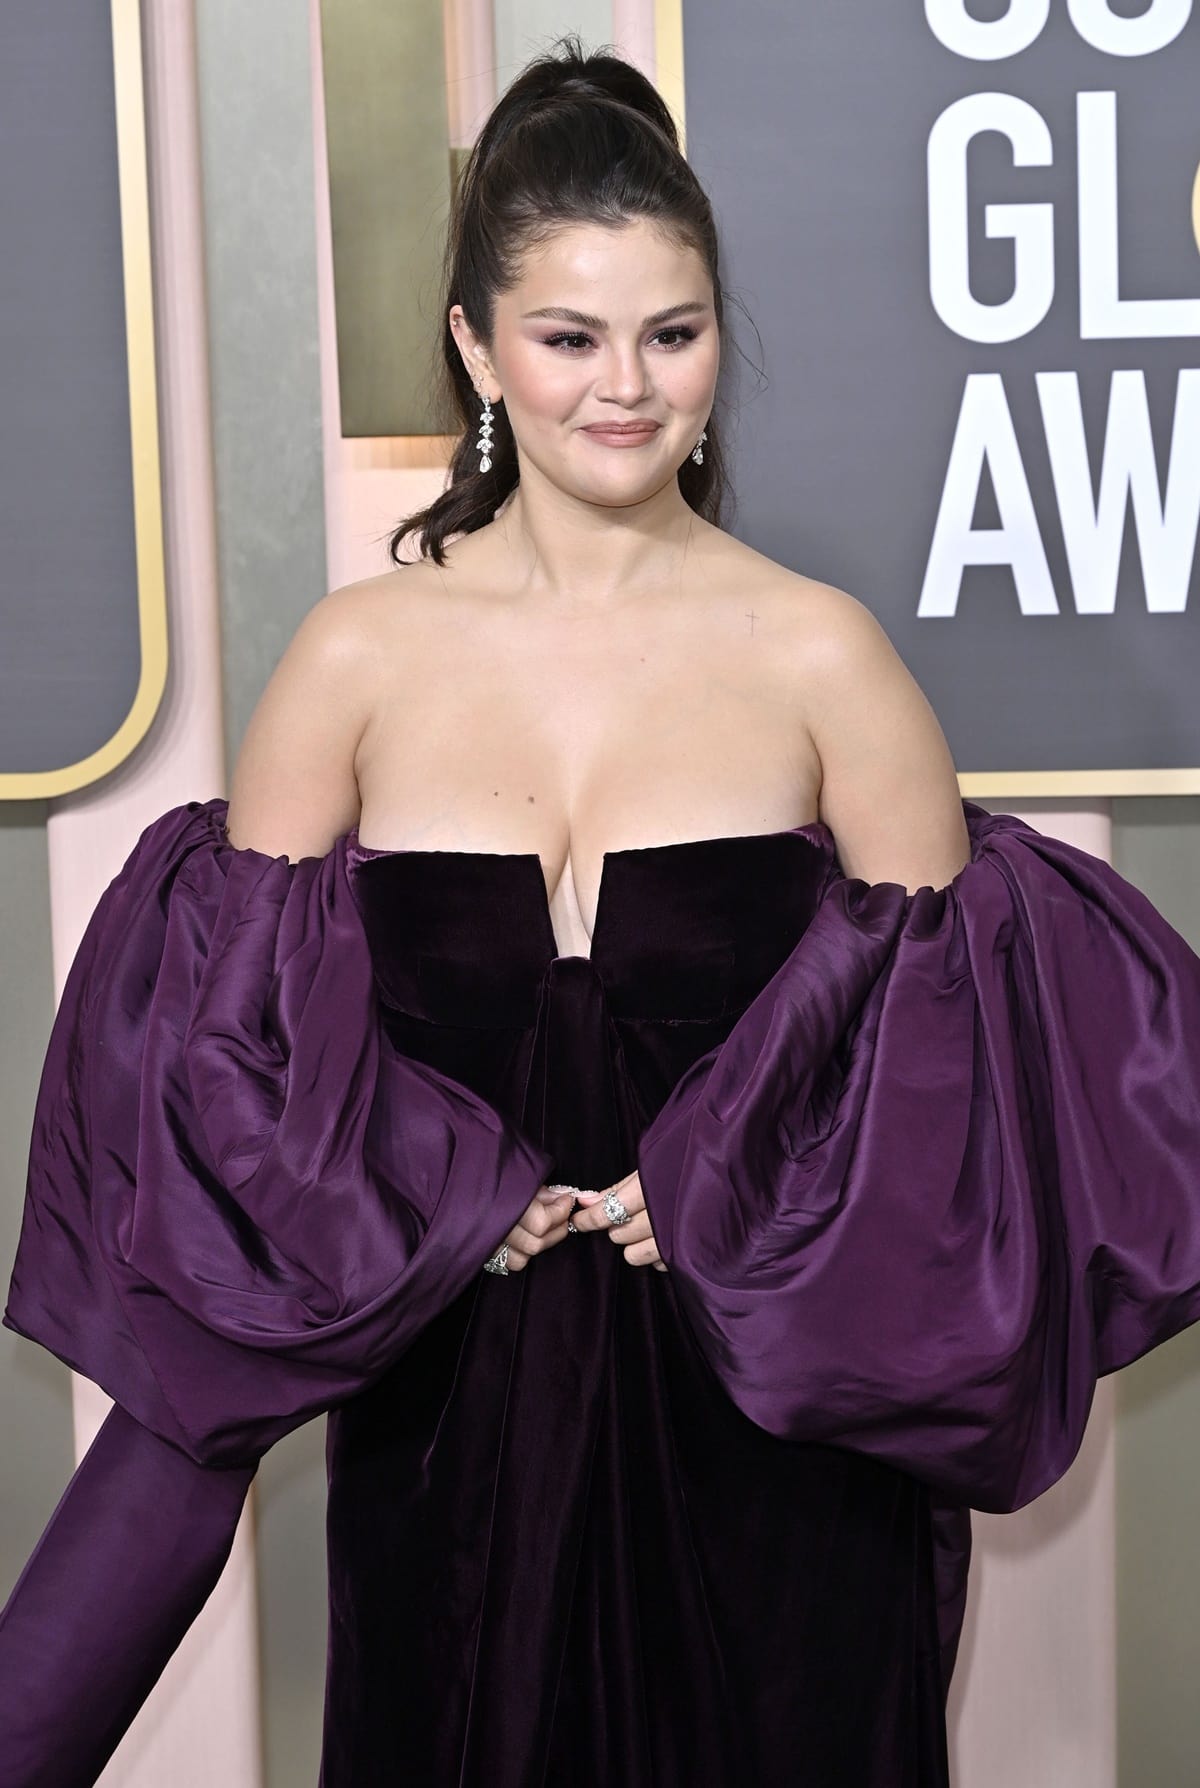 First-time acting nominee Selena Gomez was nominated for her work in Only Murders in the Building